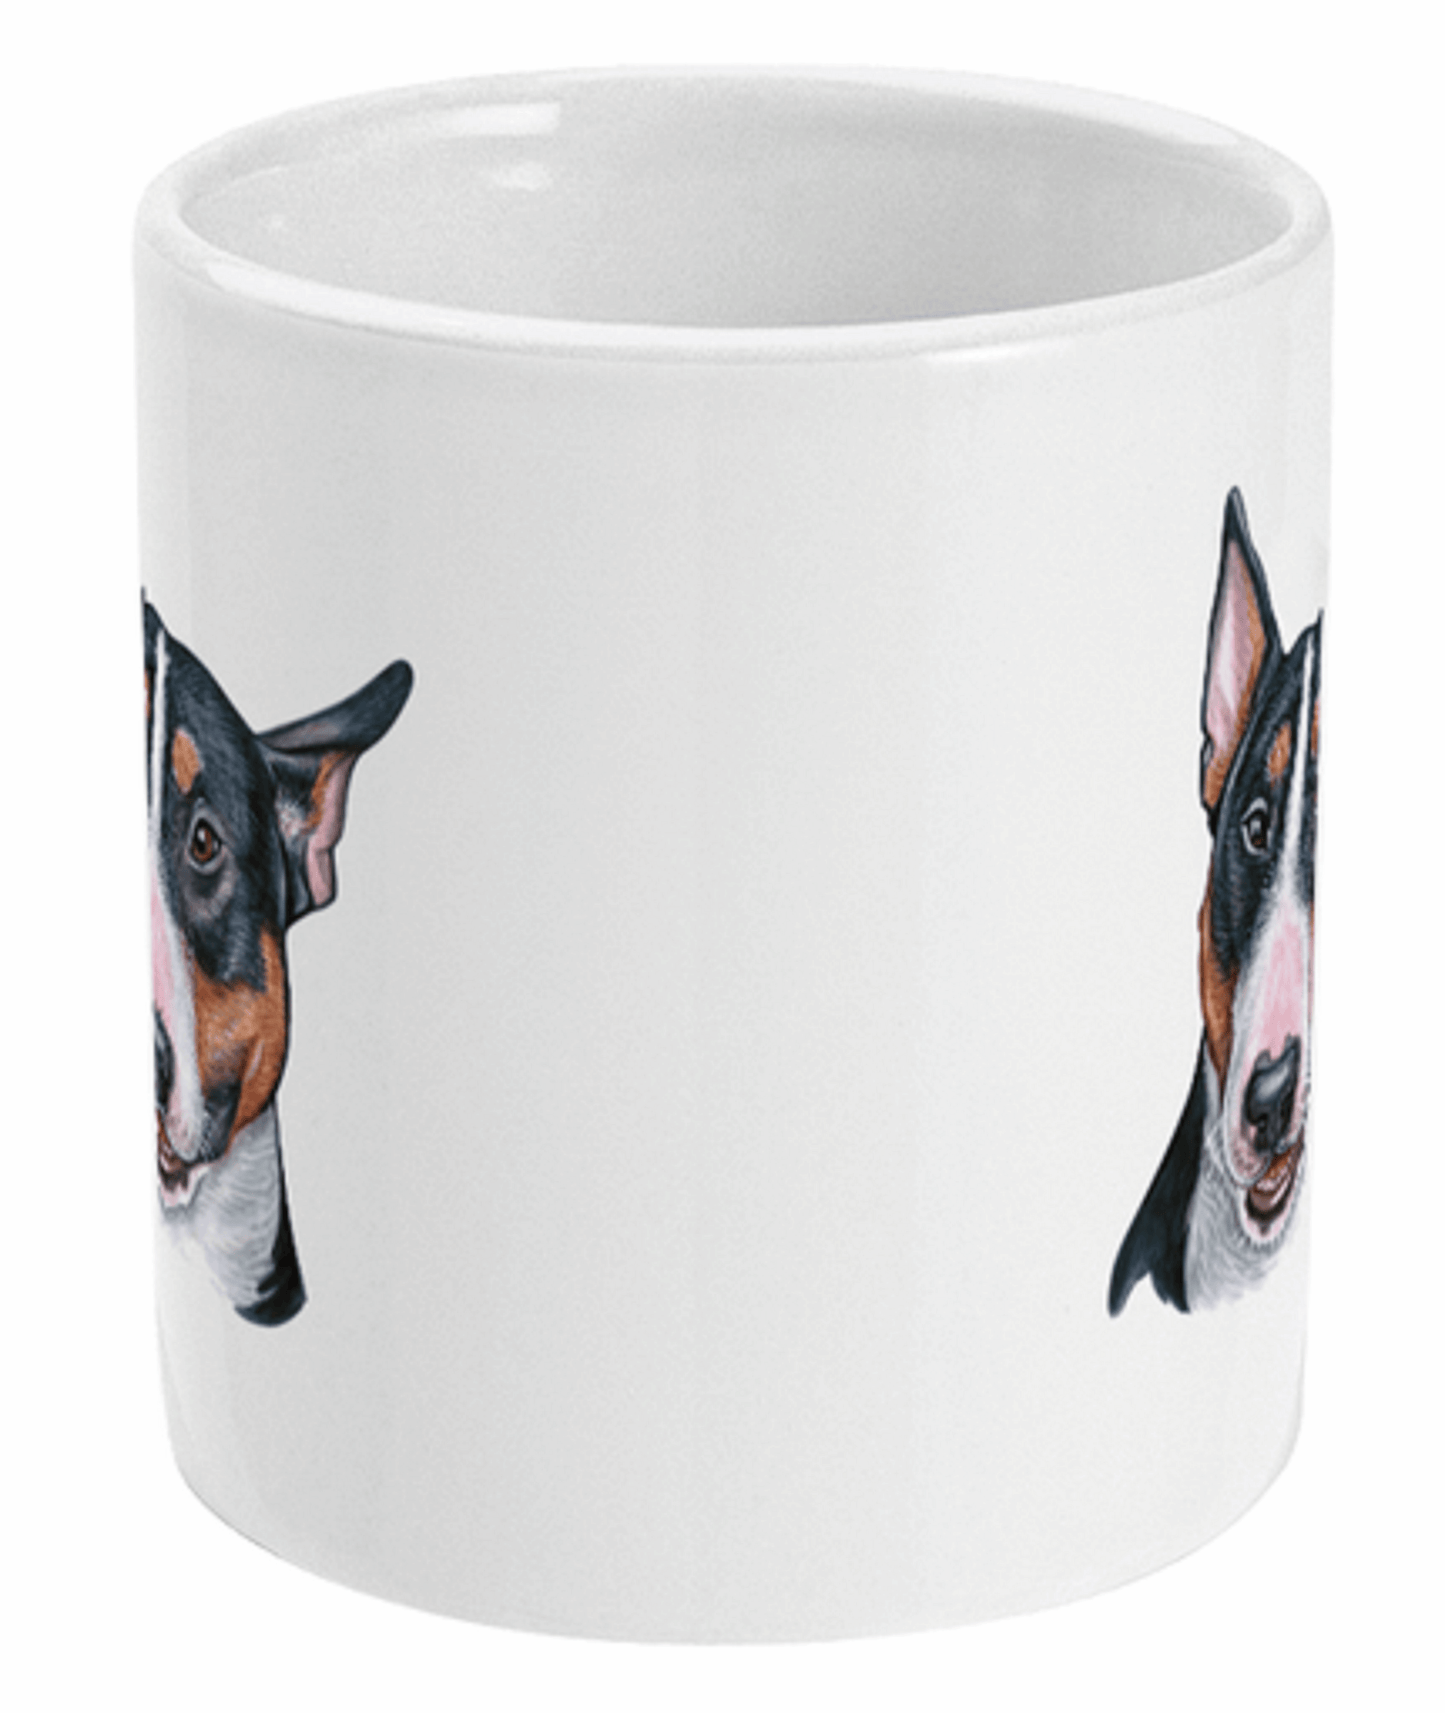  English Bull Terrier Dog Double Sided Print Mug by Free Spirit Accessories sold by Free Spirit Accessories